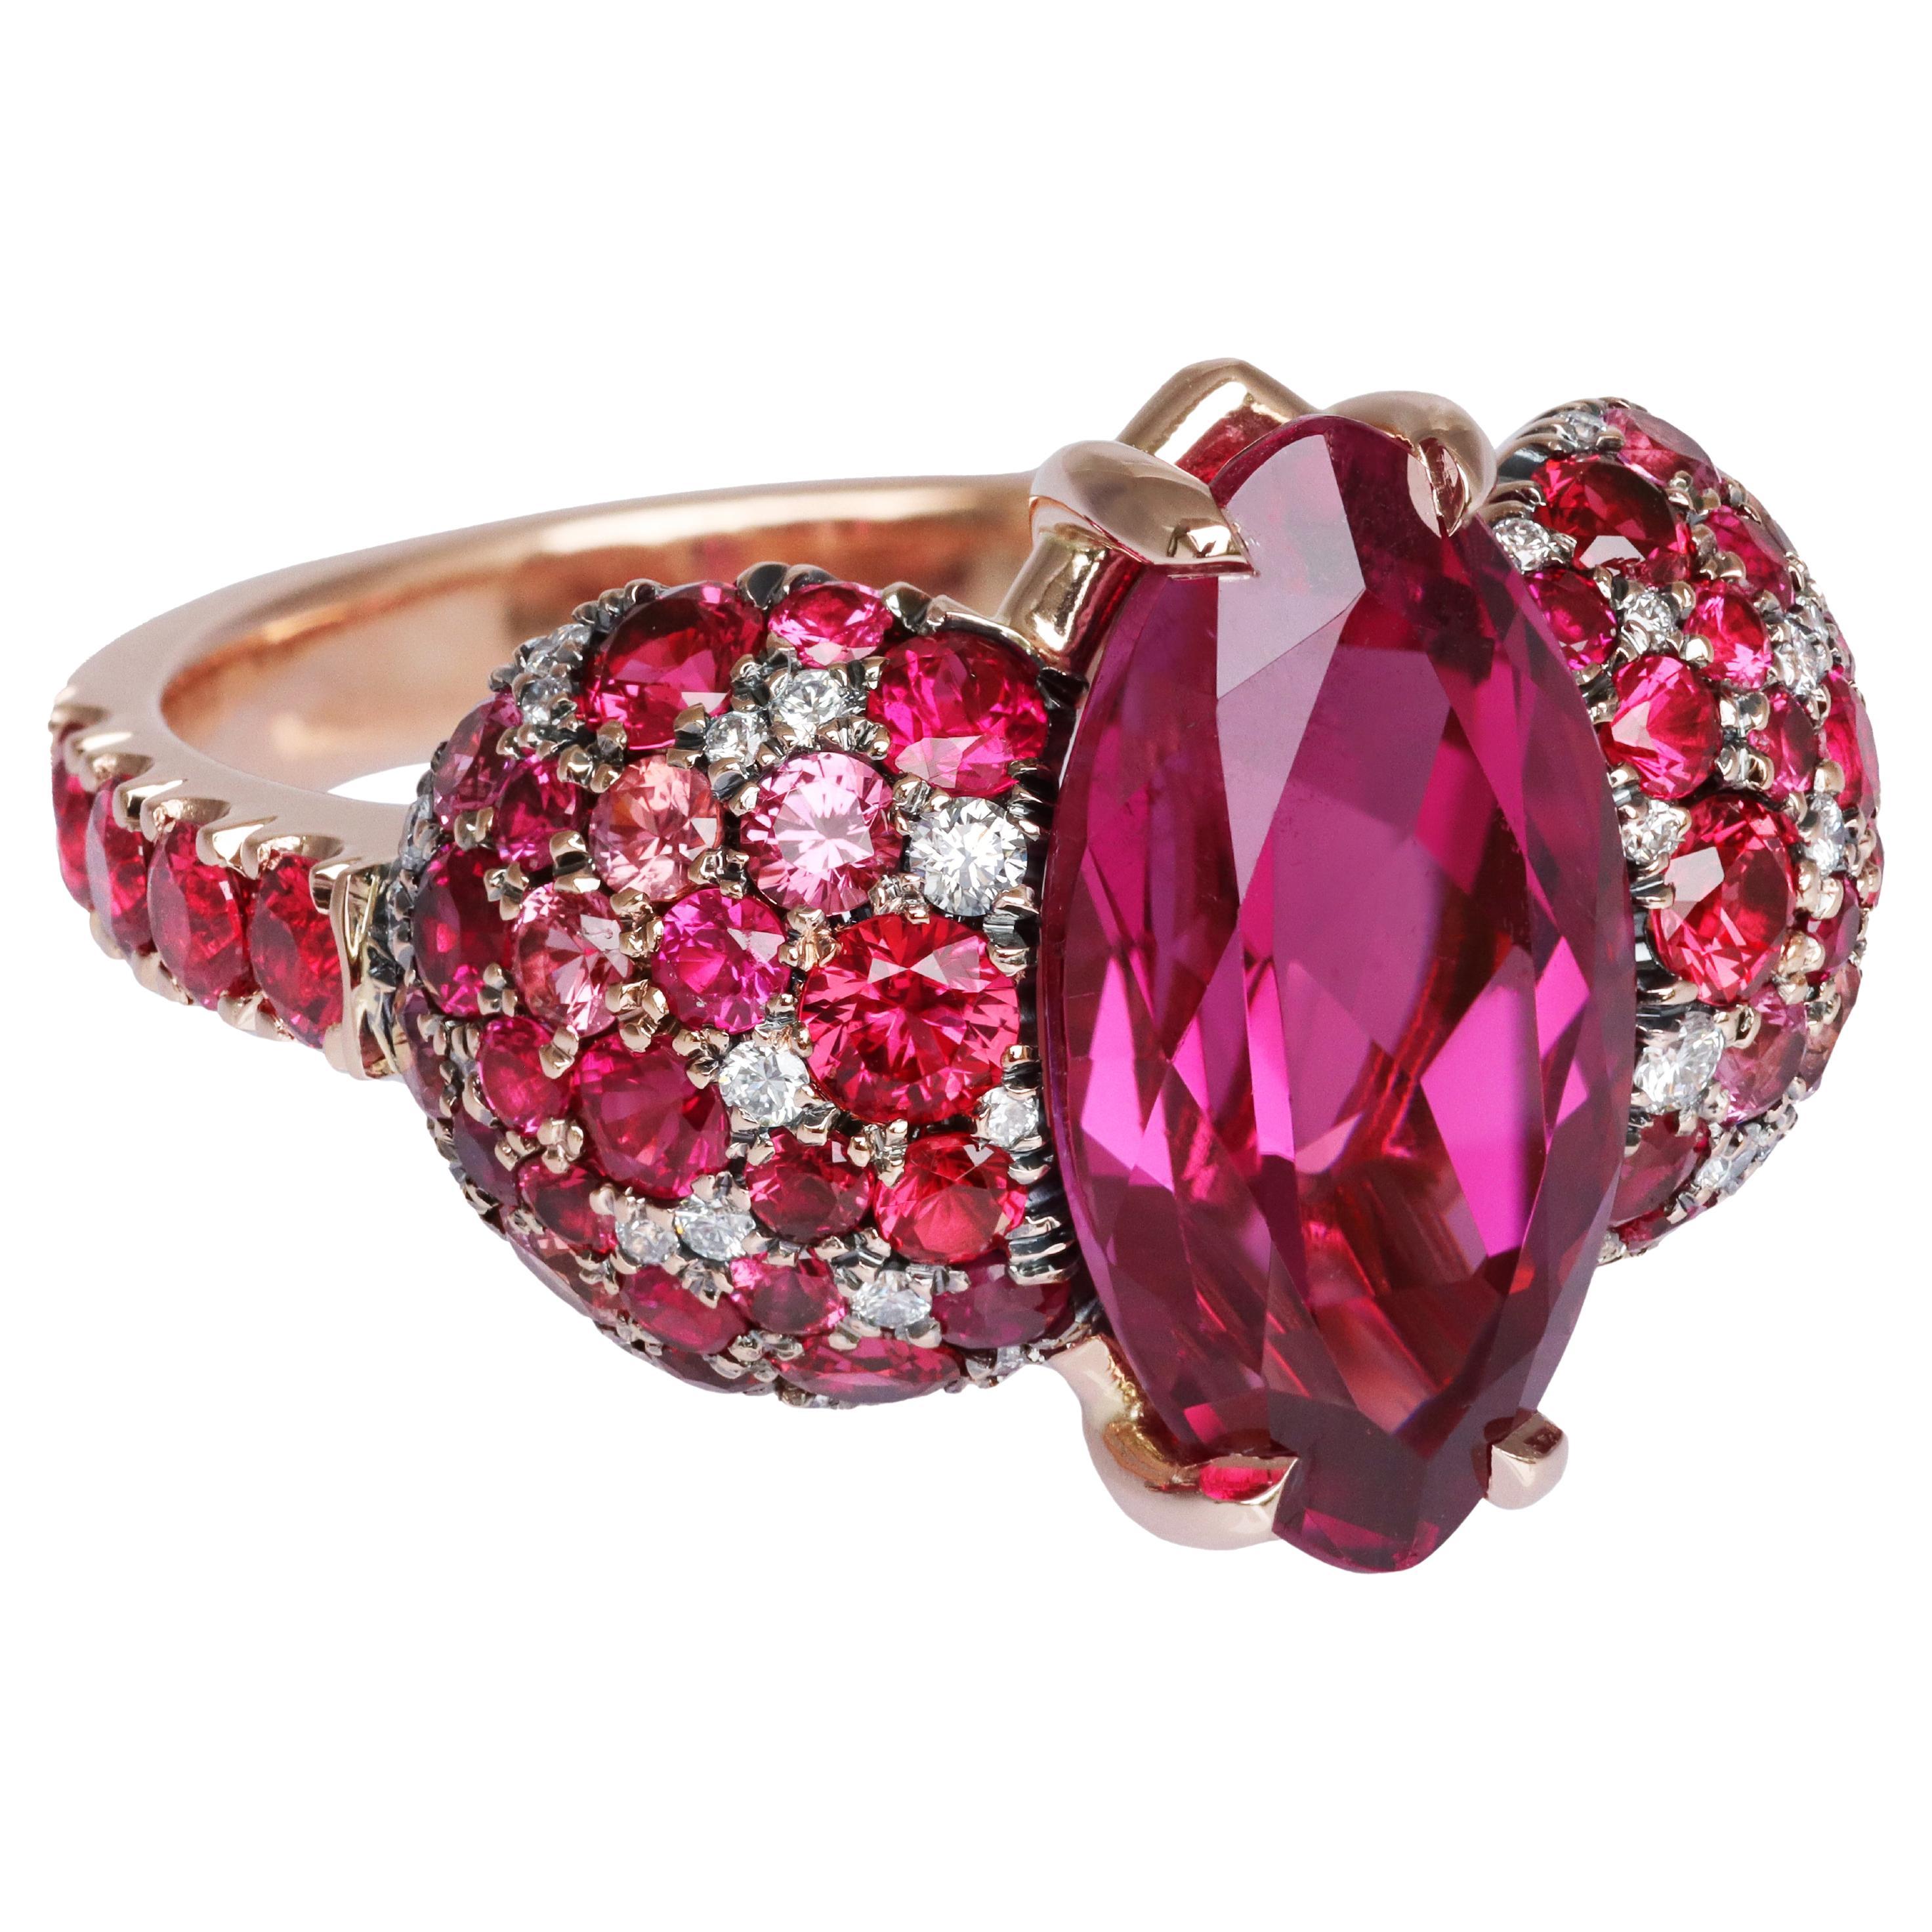 Joke Quick Rubellite Rubis Spinelle Rouge Padparadscha Saphir Bague Coctail